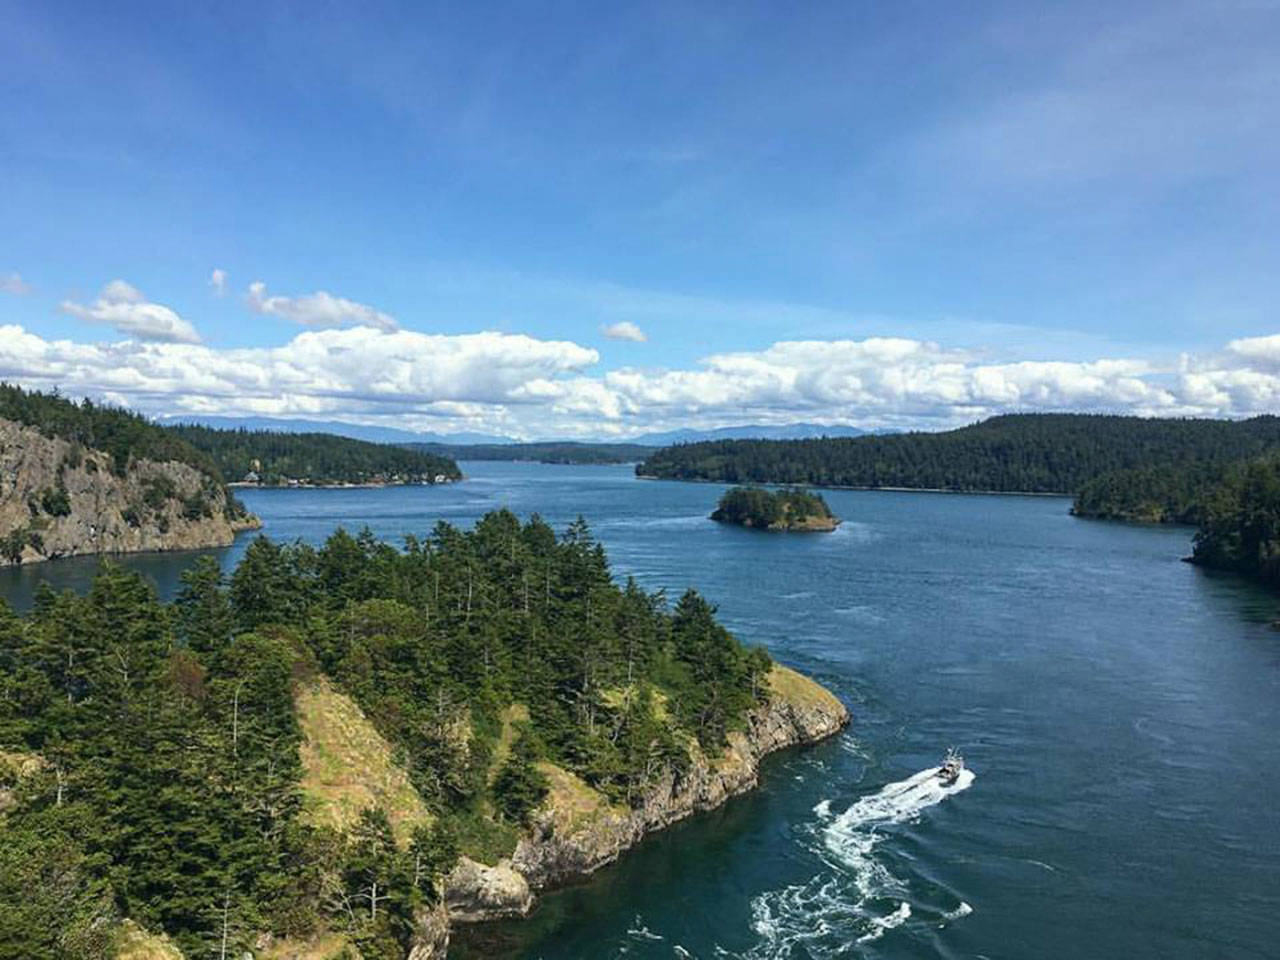 Check out this view from Deception pass bridge as a boat zips through the waters below on a sunny June 2. Photo by Anne TePaske